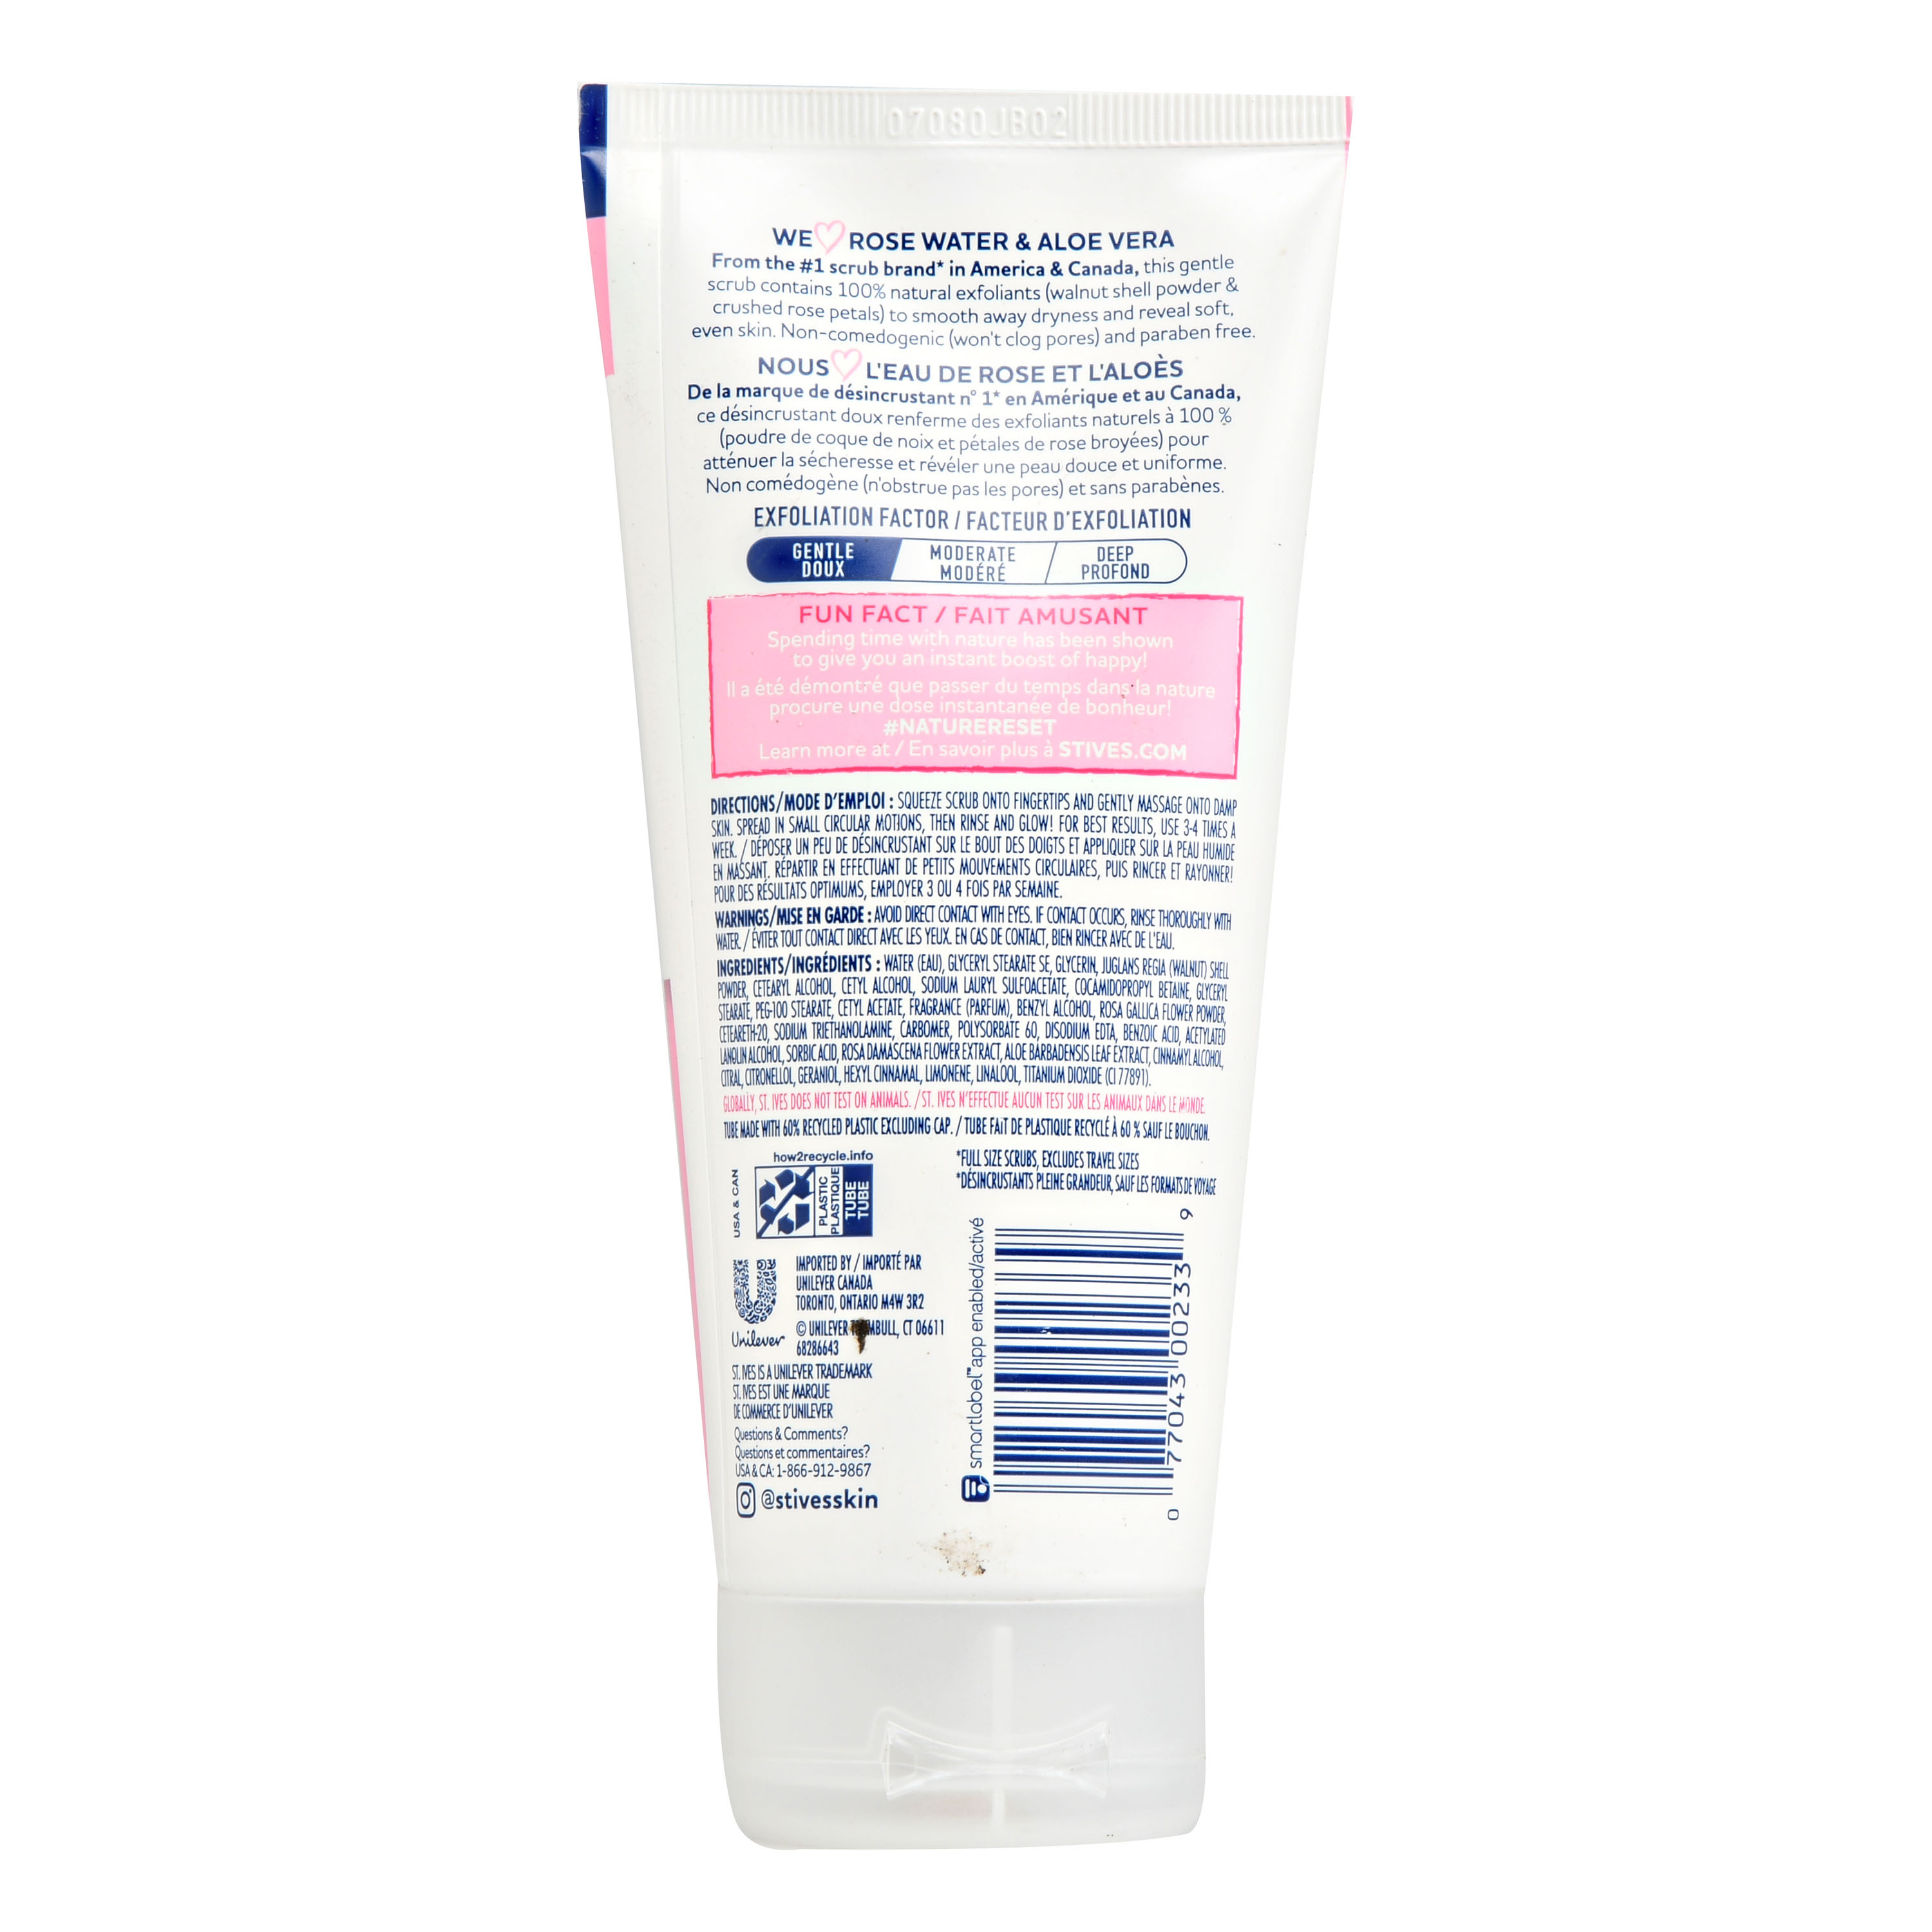 St. Ives Gentle Smoothing Face Scrub Rose Water & Aloe Vera Made with 100% Natural Exfoliants, Paraben Free, Oil-Free, Dermatologist Tested Our Gentlest Scrub Yet 6 oz - image 3 of 5